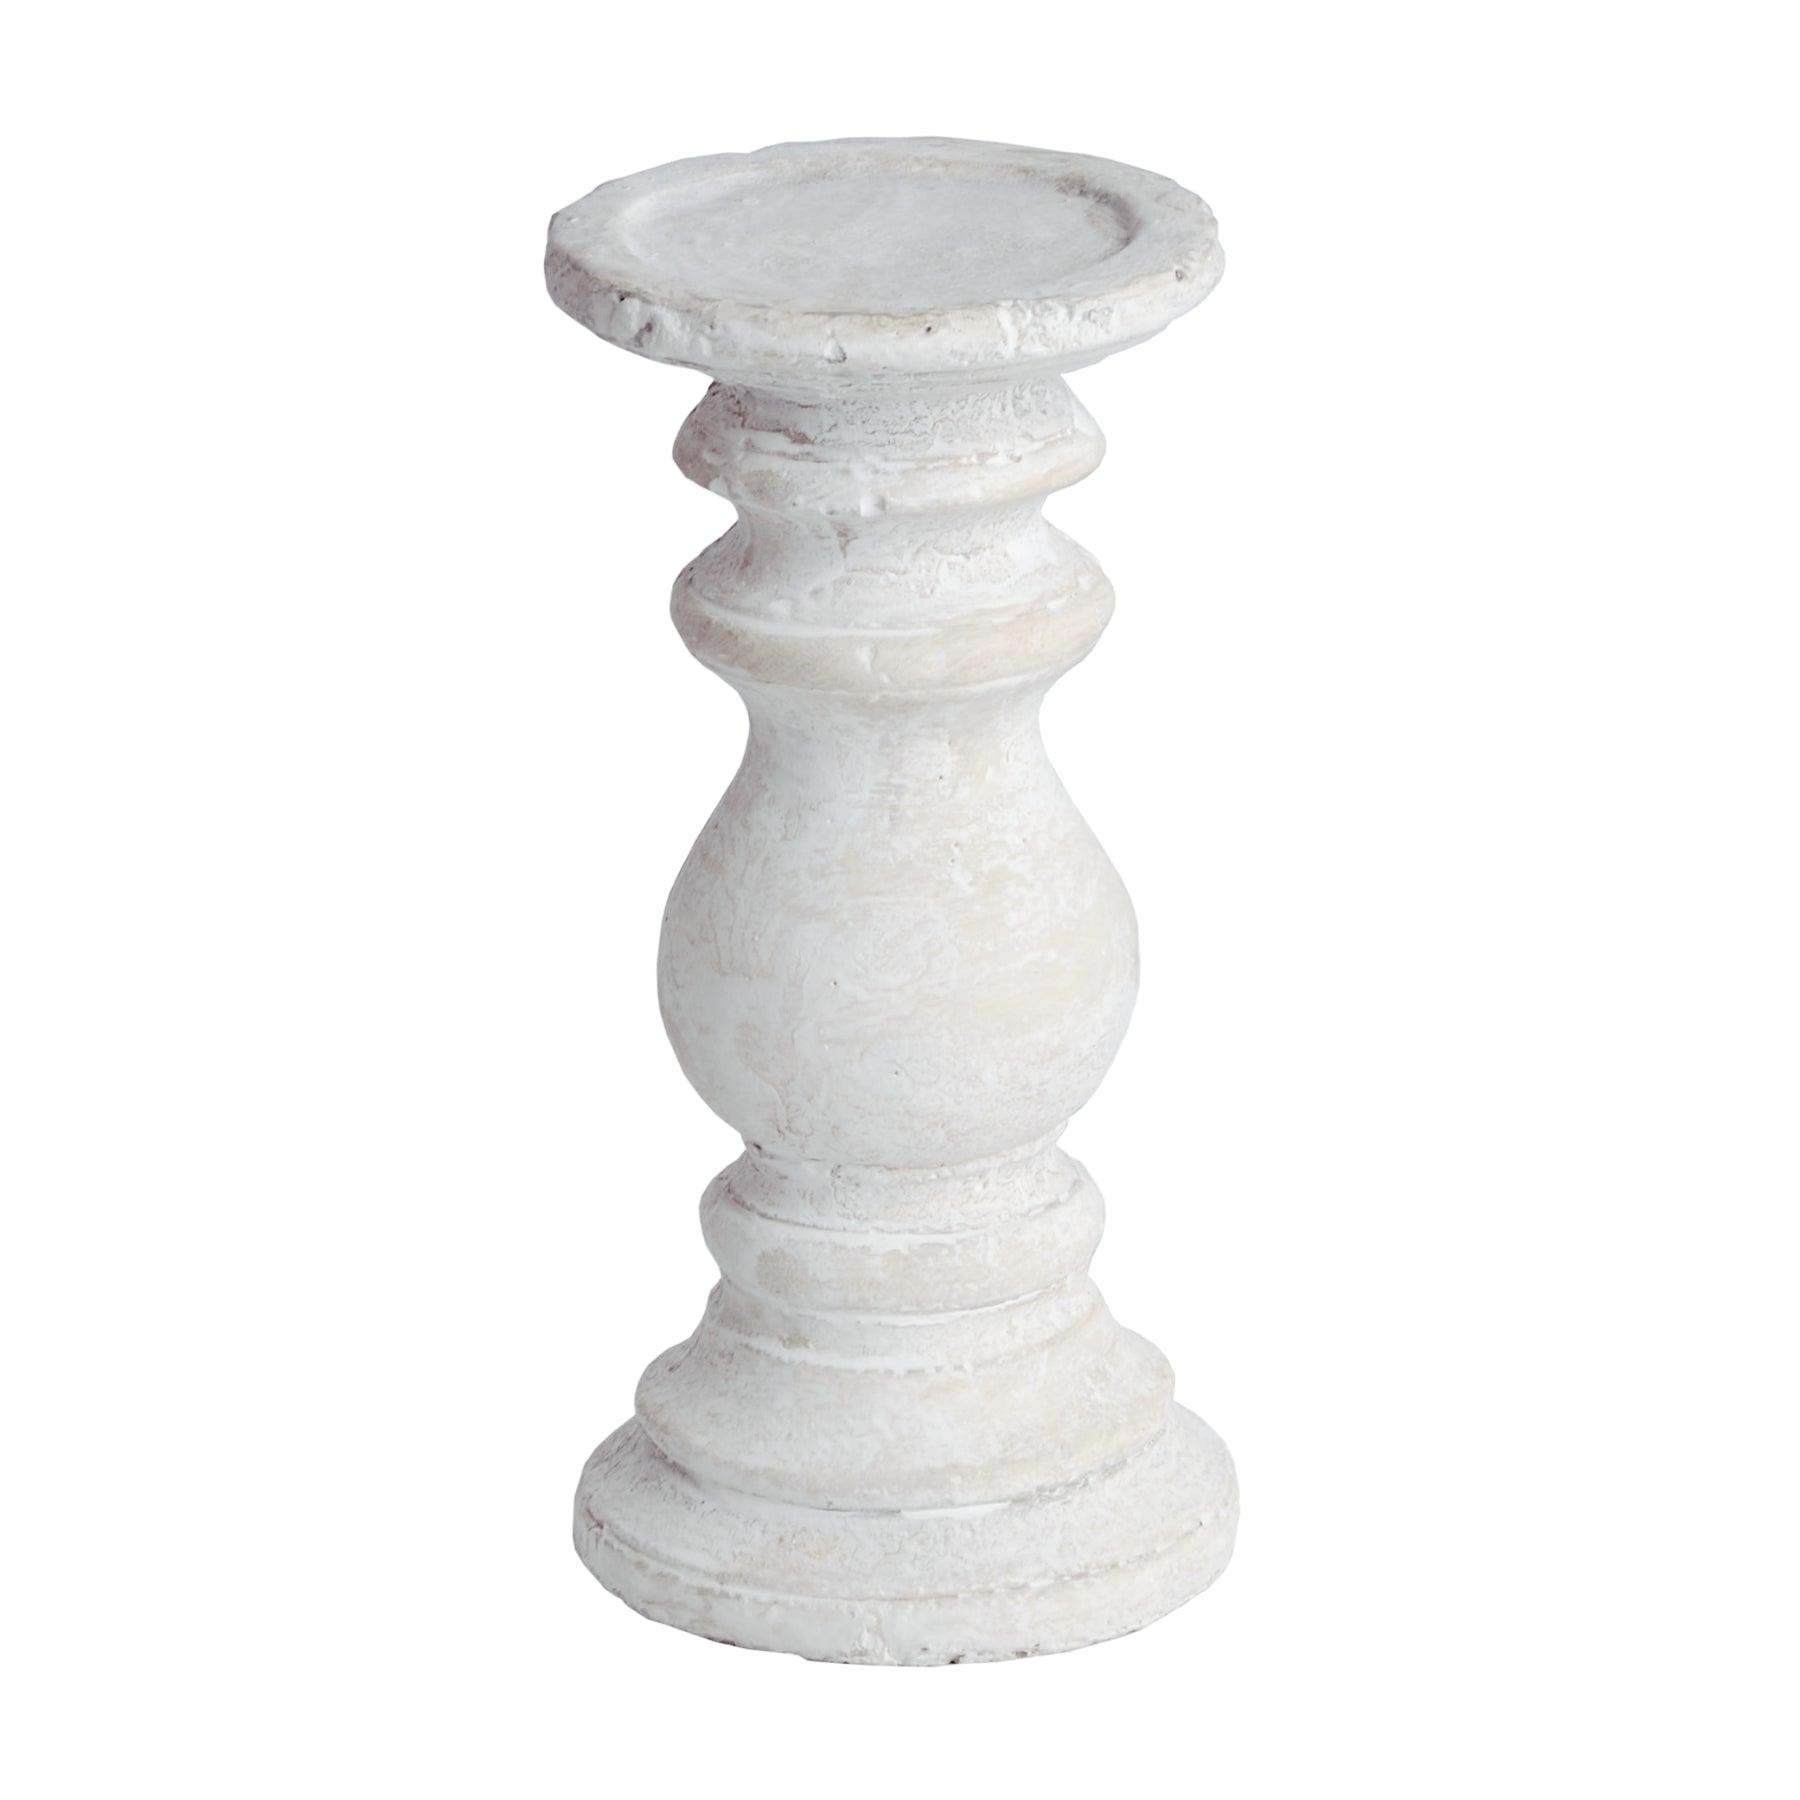 View Small Stone Candle Holder information